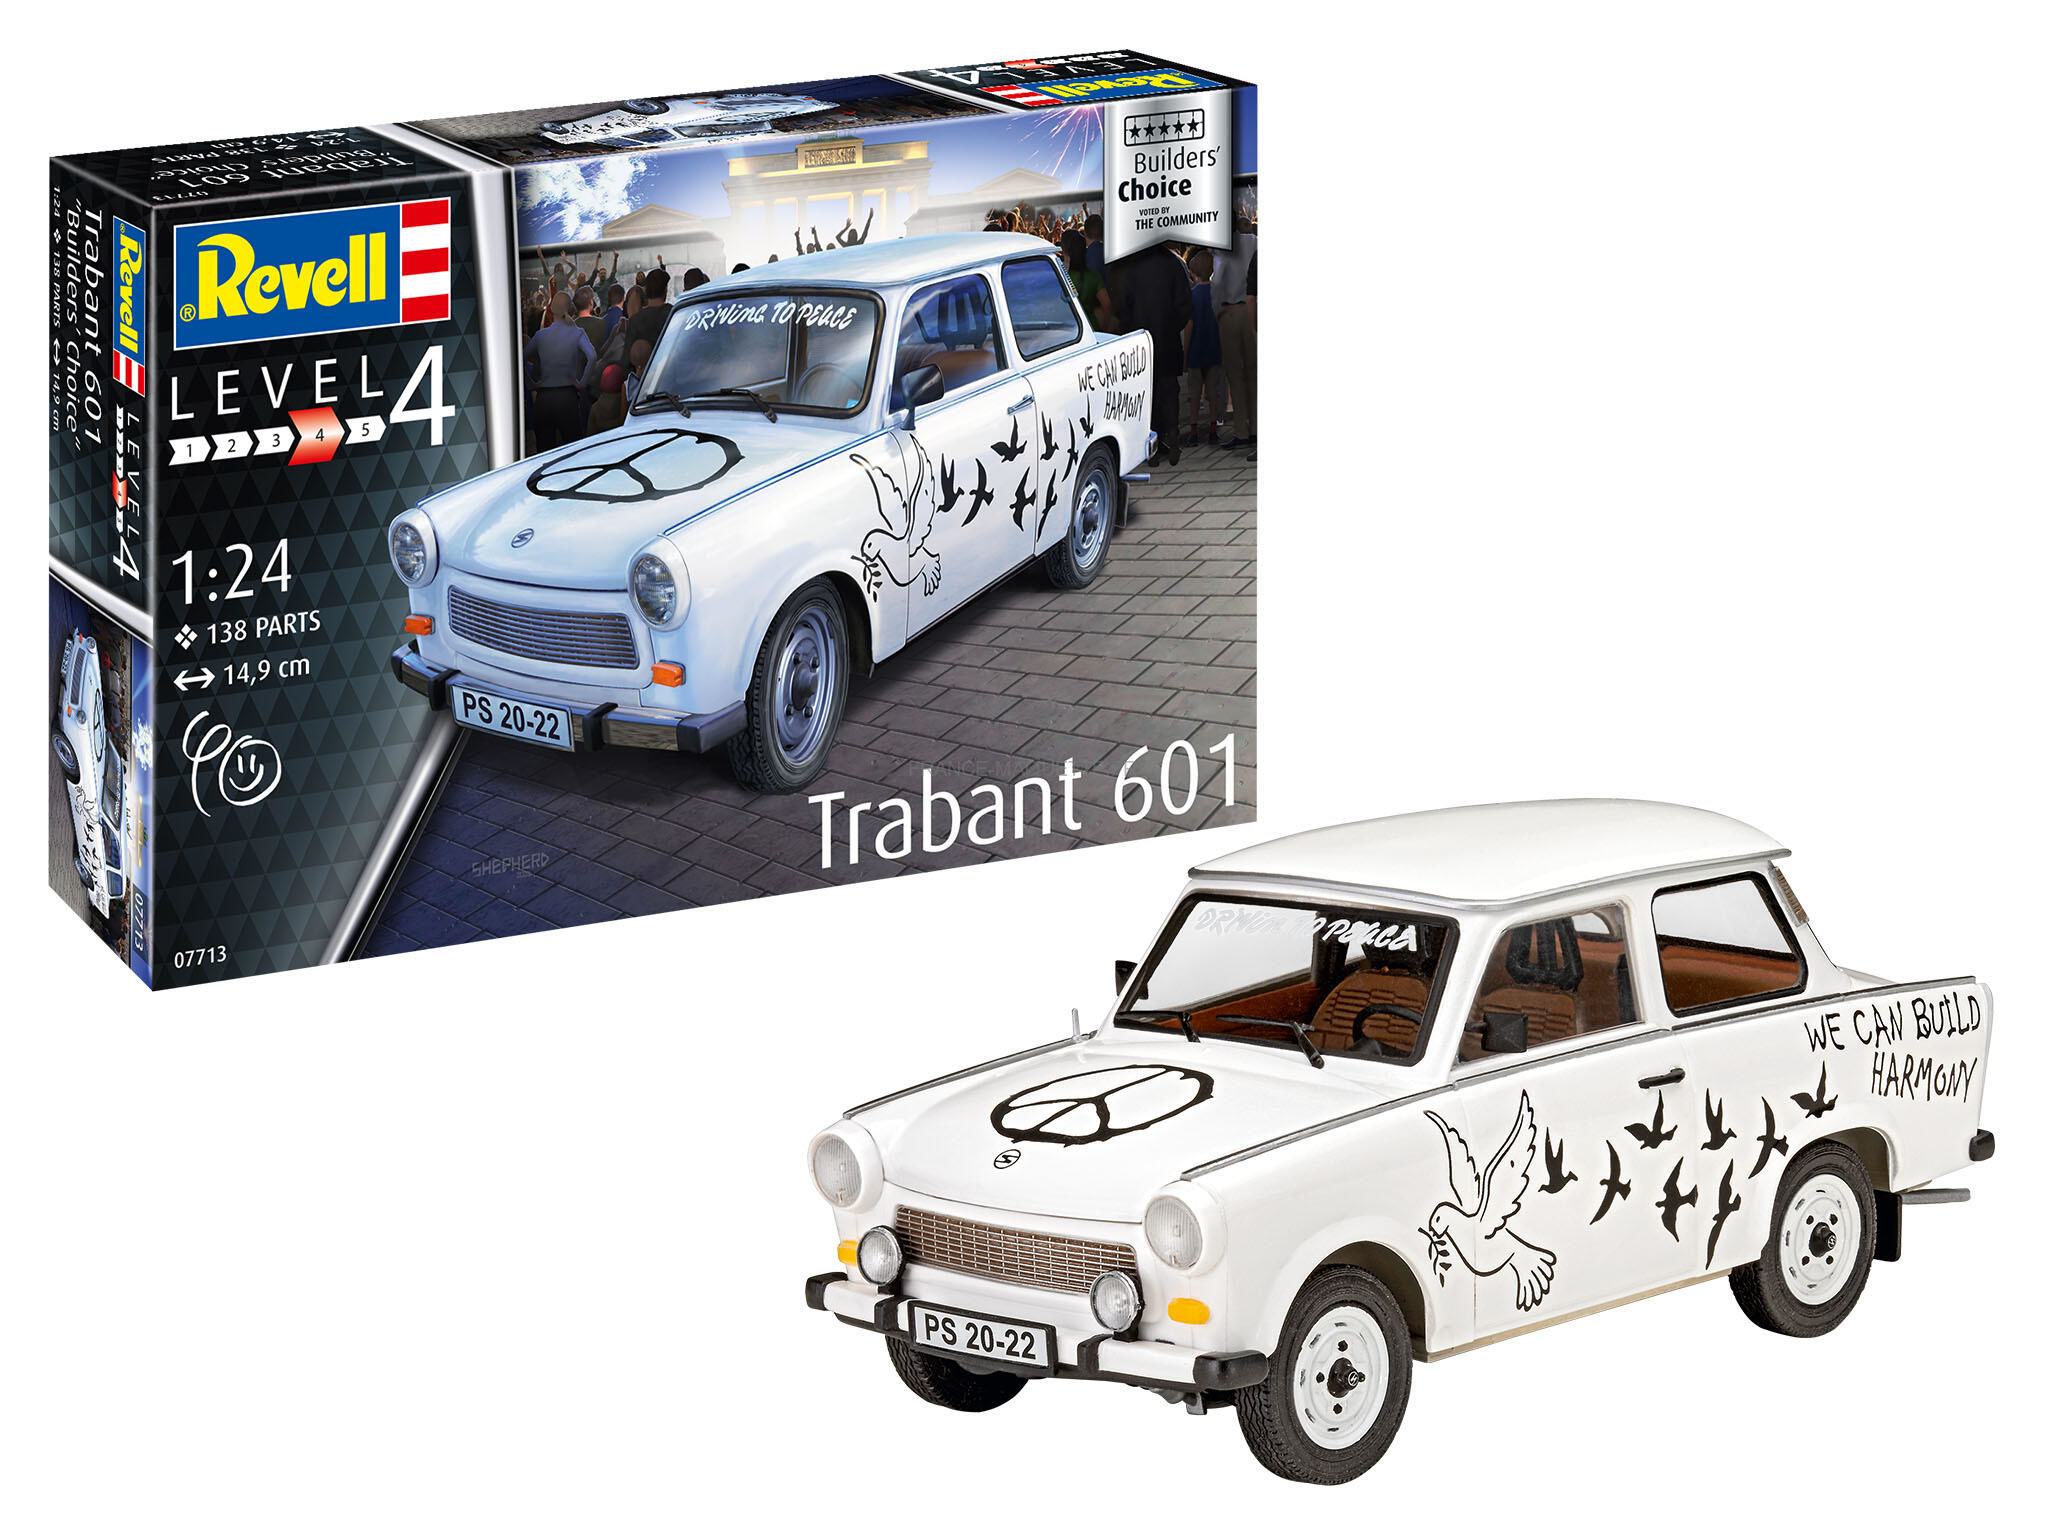 Revell 07713 - Maquette Trabant 601S Builder's Choice 1/24